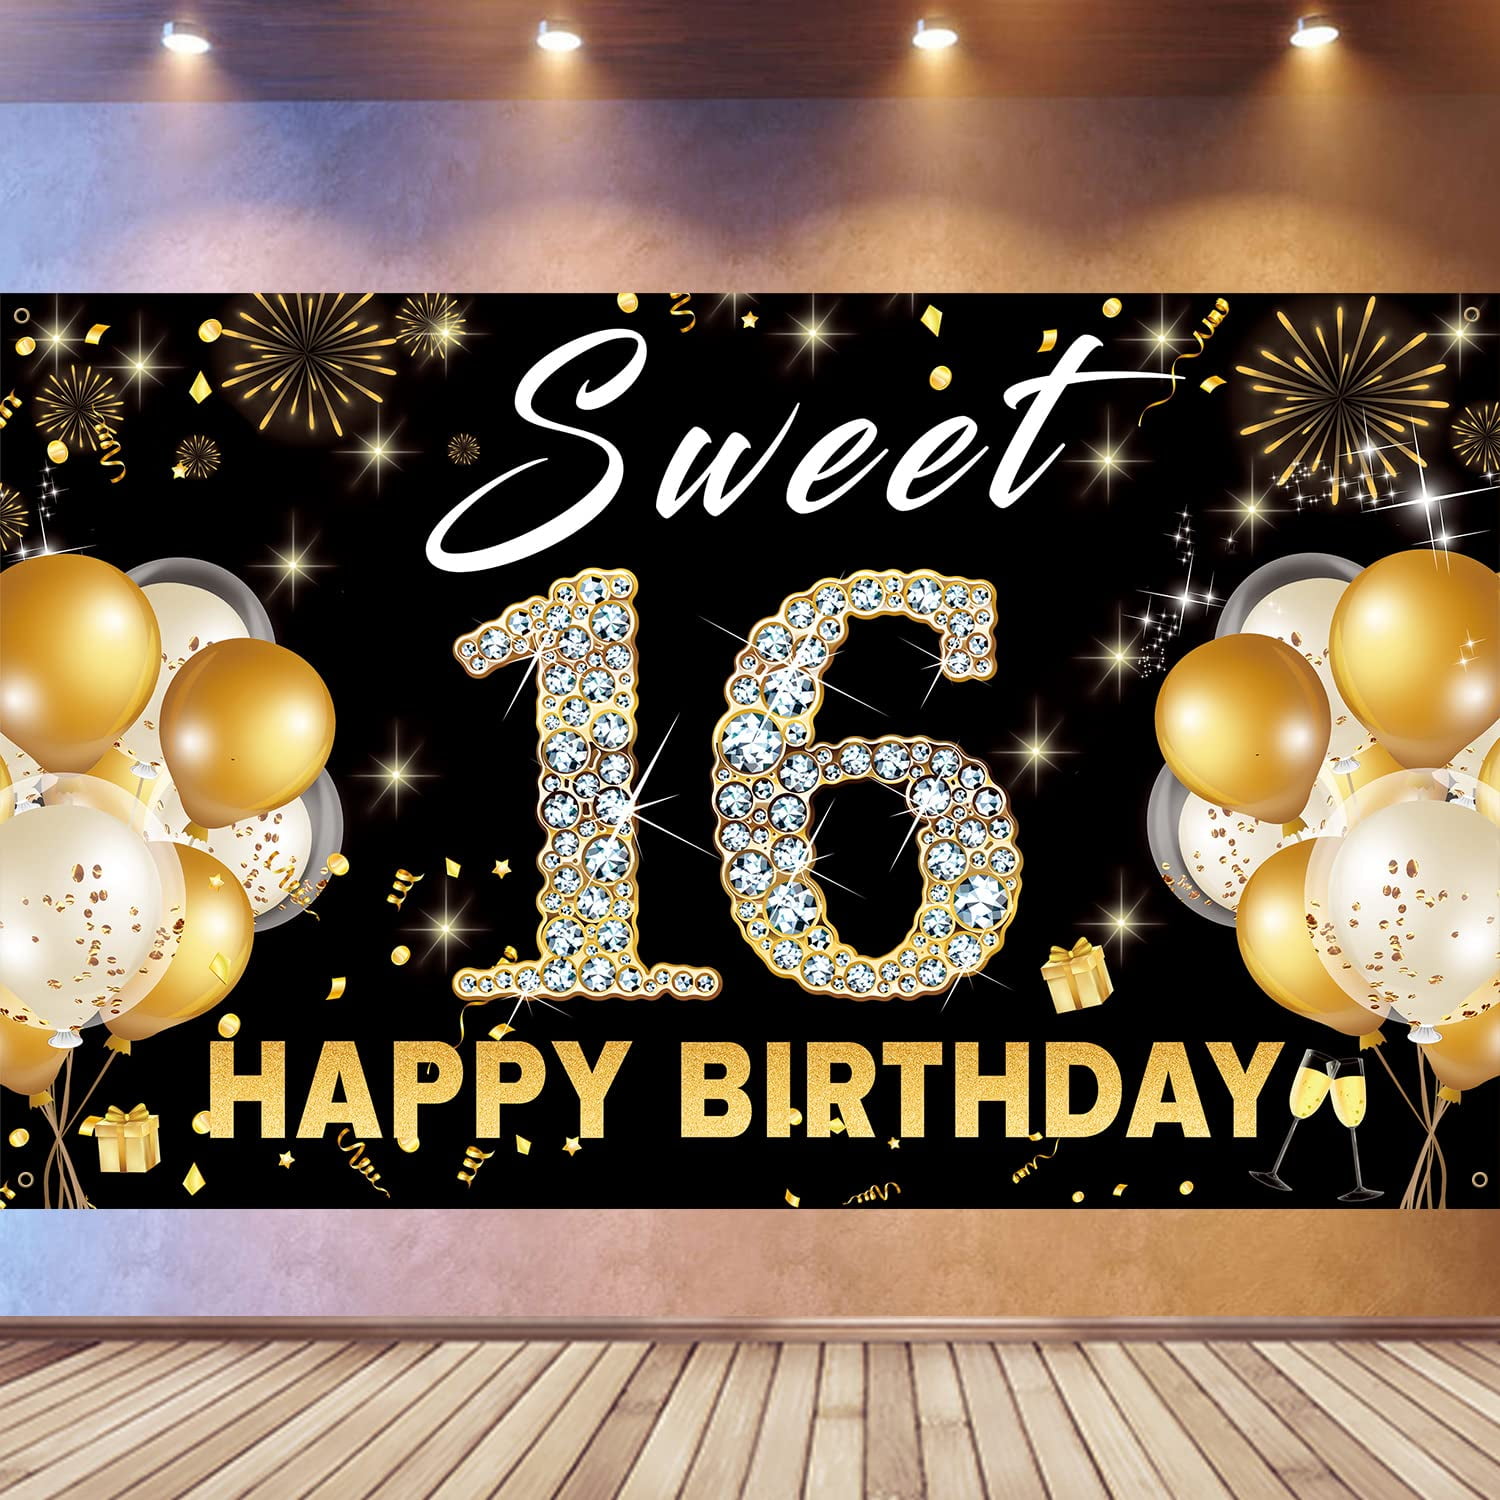 Sweet 16 Backdrop Birthday Decorations, Sweet Sixteen Photo Booth Props,  Black Gold Happy 16th Birthday Party Decorations For Girls, Large  Fabric 16th Birthday Backdrop Banner 71 * 43 inch PHXEY 